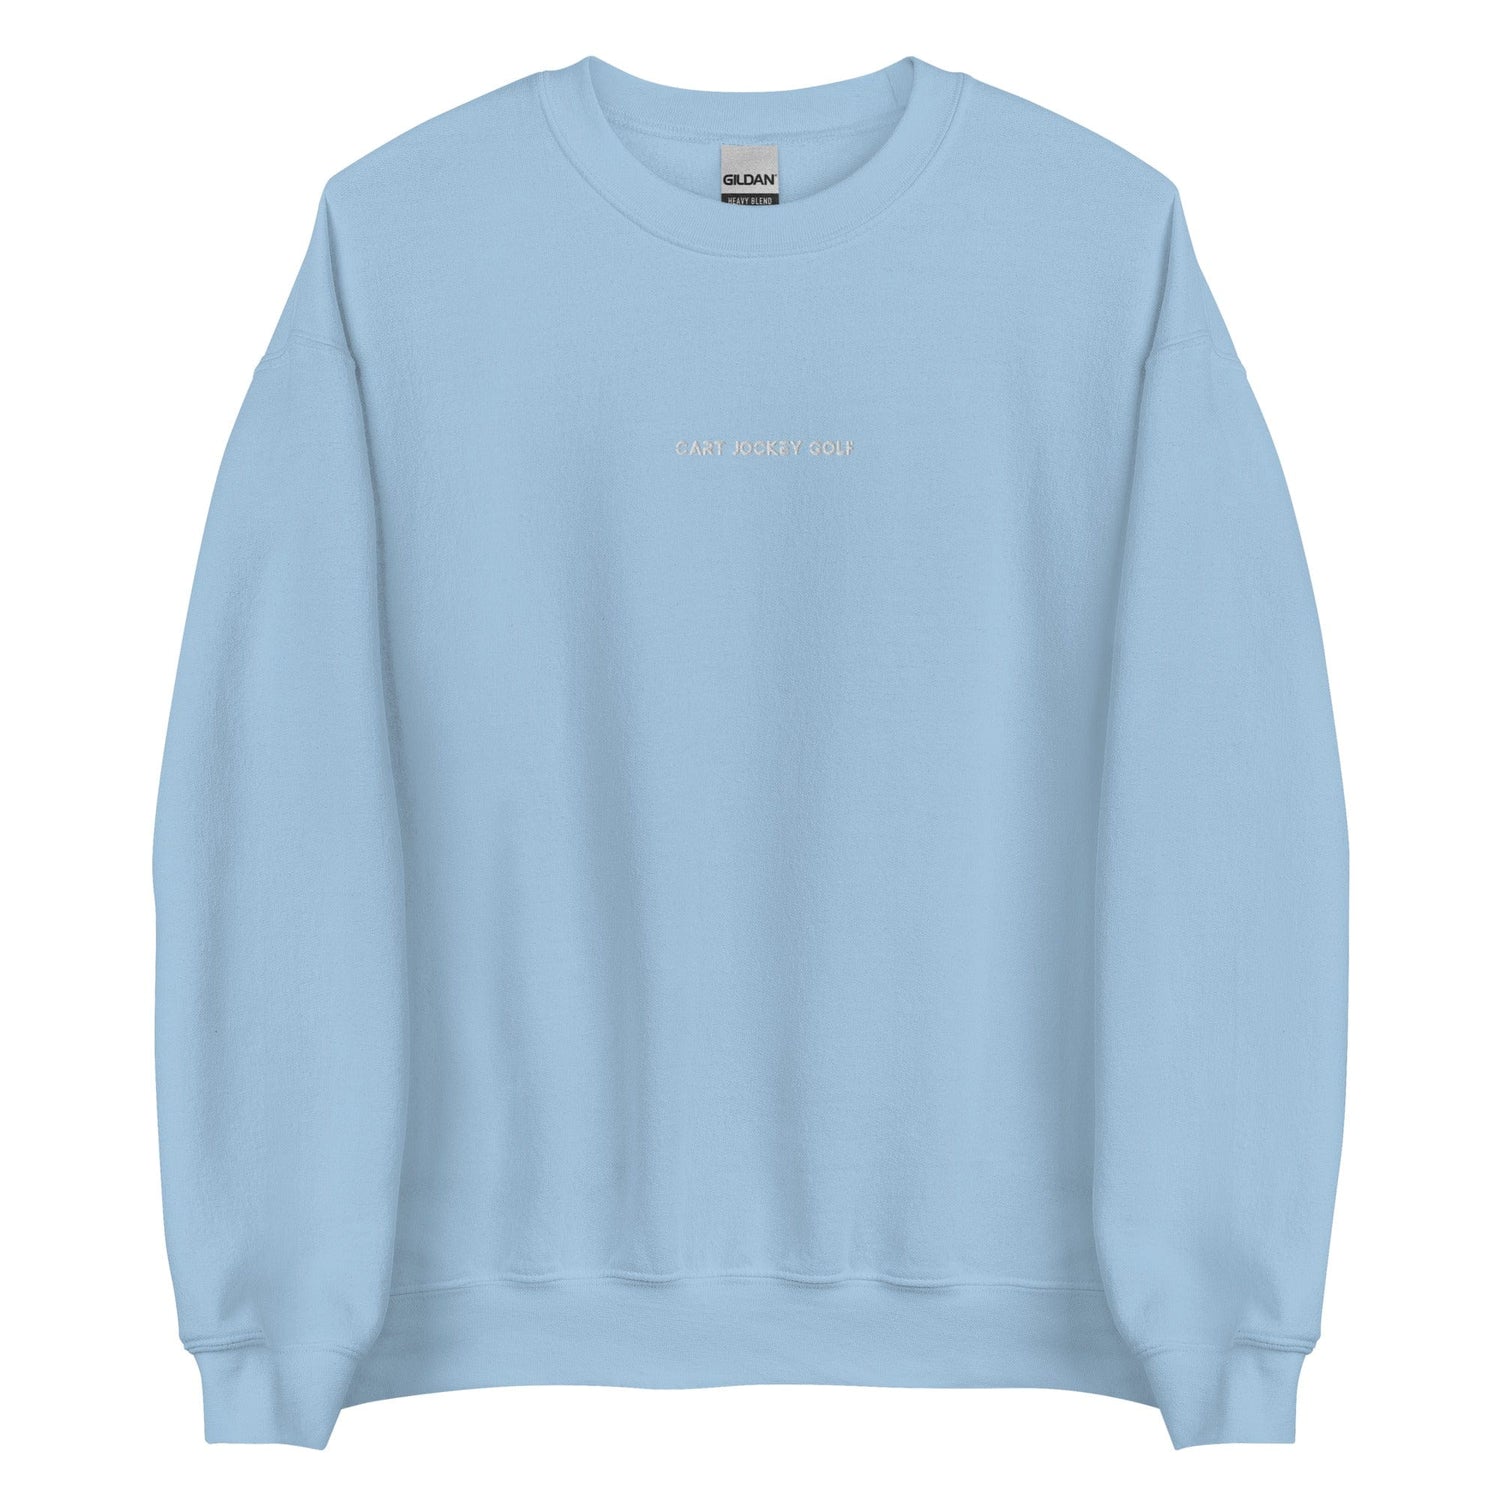 a light blue Simple Embroidered Crewneck sweatshirt with the word 'love' embroidered on it from Cart Jockey Golf.